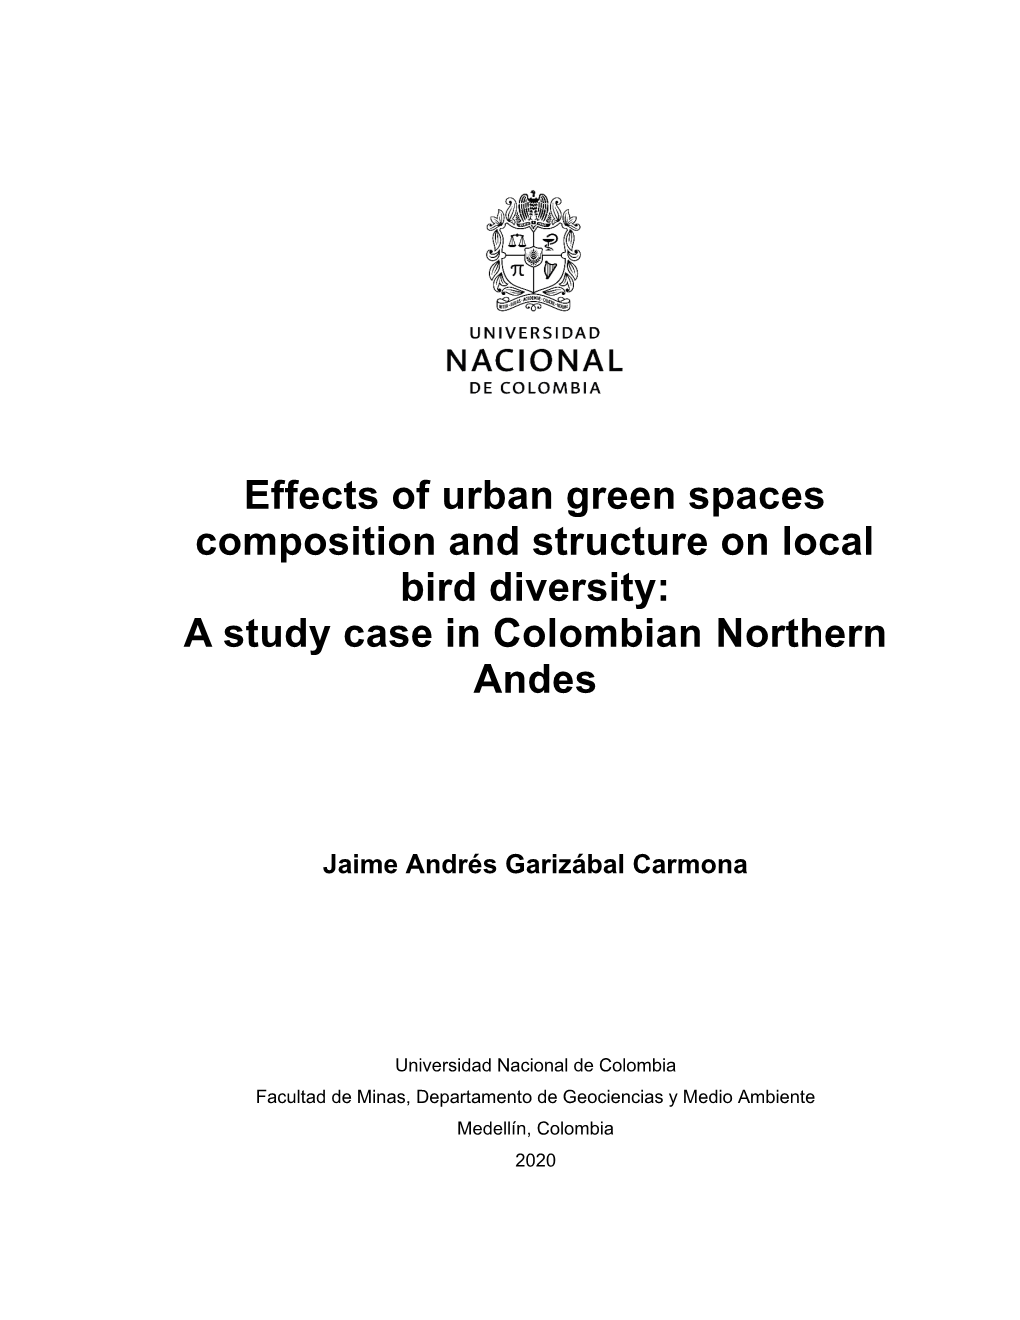 Effects of Urban Green Spaces Composition and Structure on Local Bird Diversity: a Study Case in Colombian Northern Andes